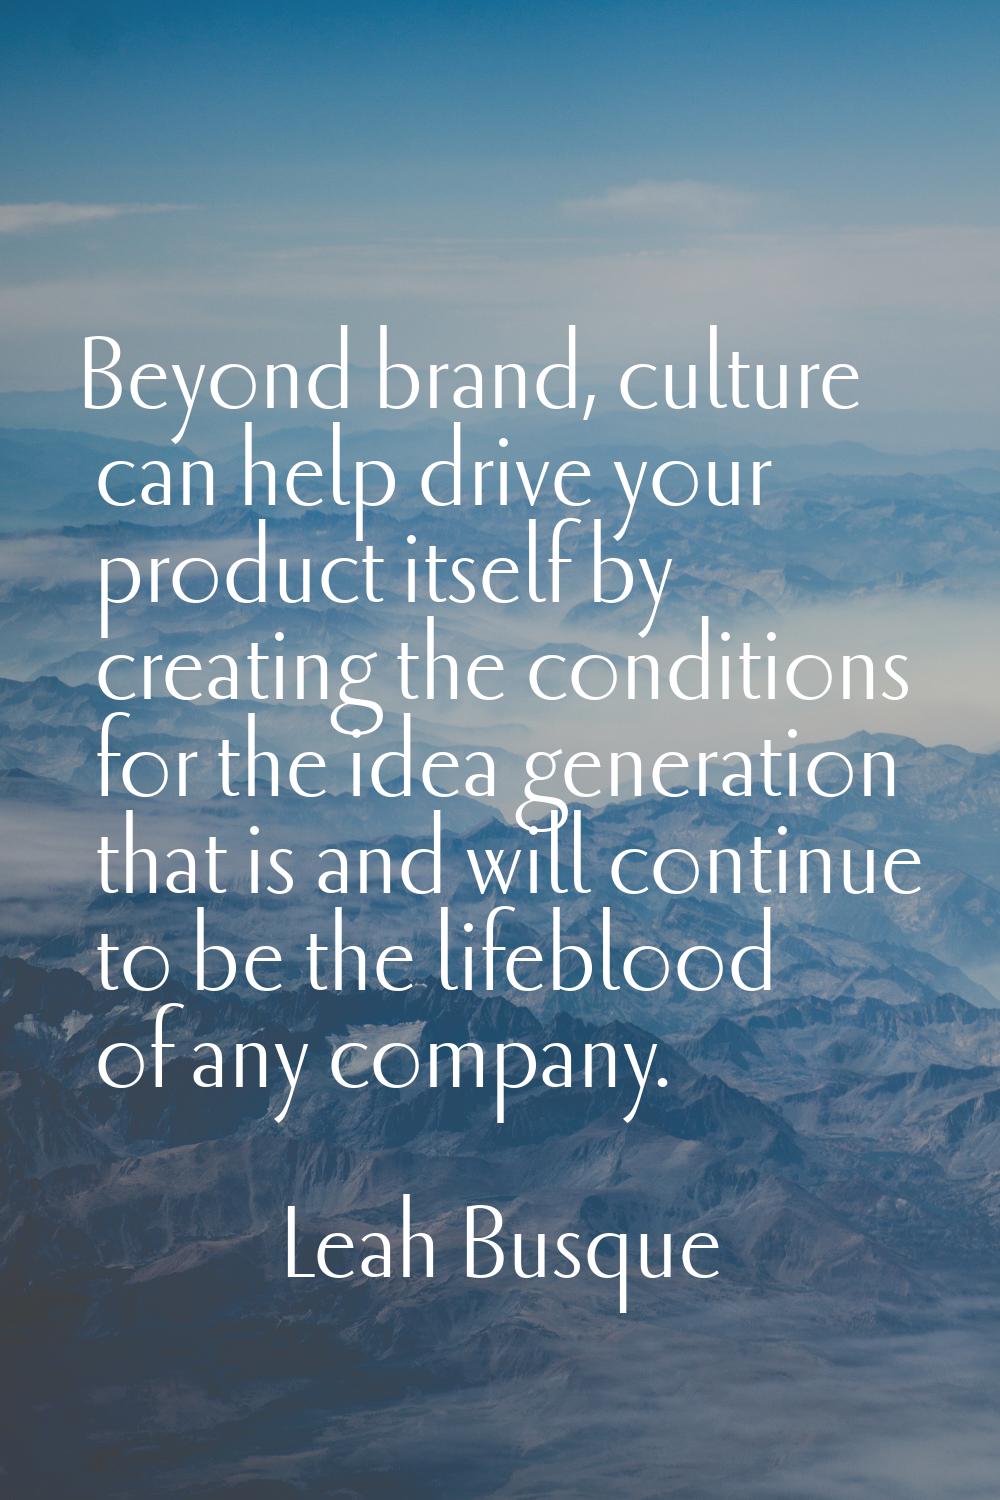 Beyond brand, culture can help drive your product itself by creating the conditions for the idea ge